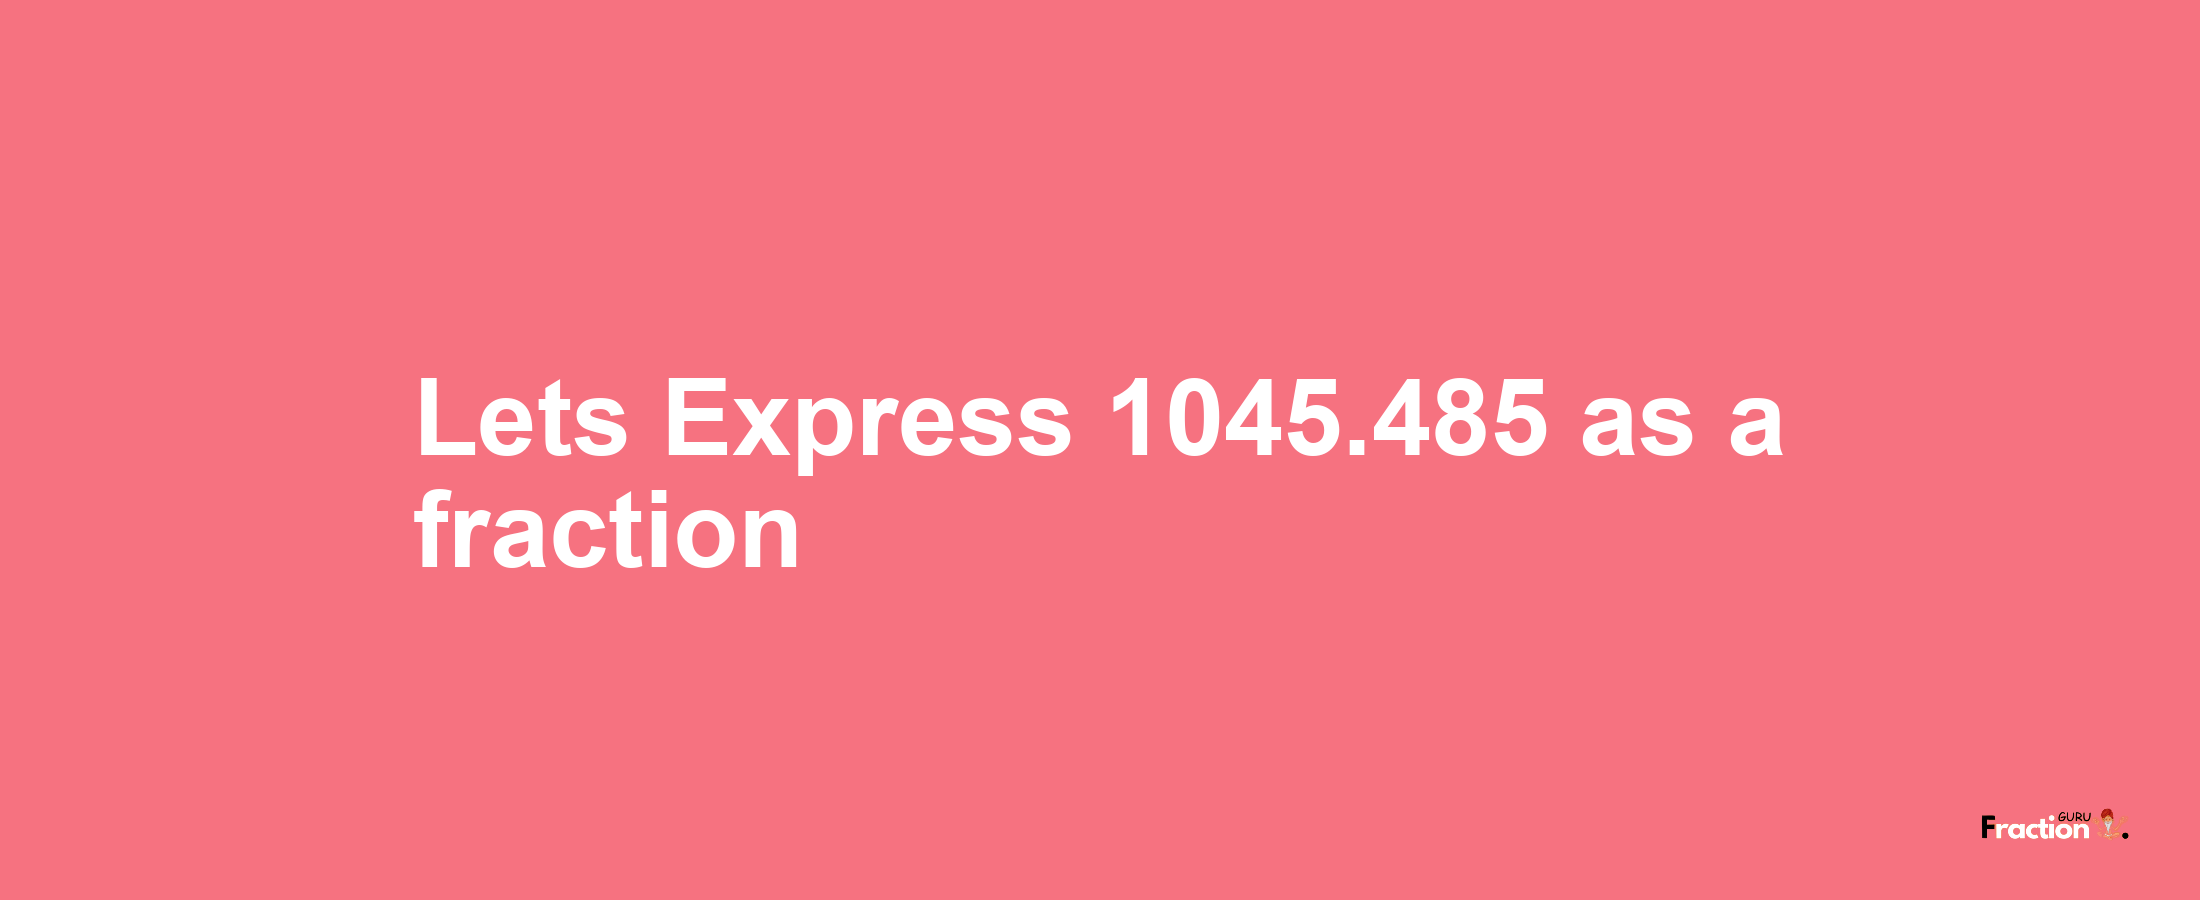 Lets Express 1045.485 as afraction